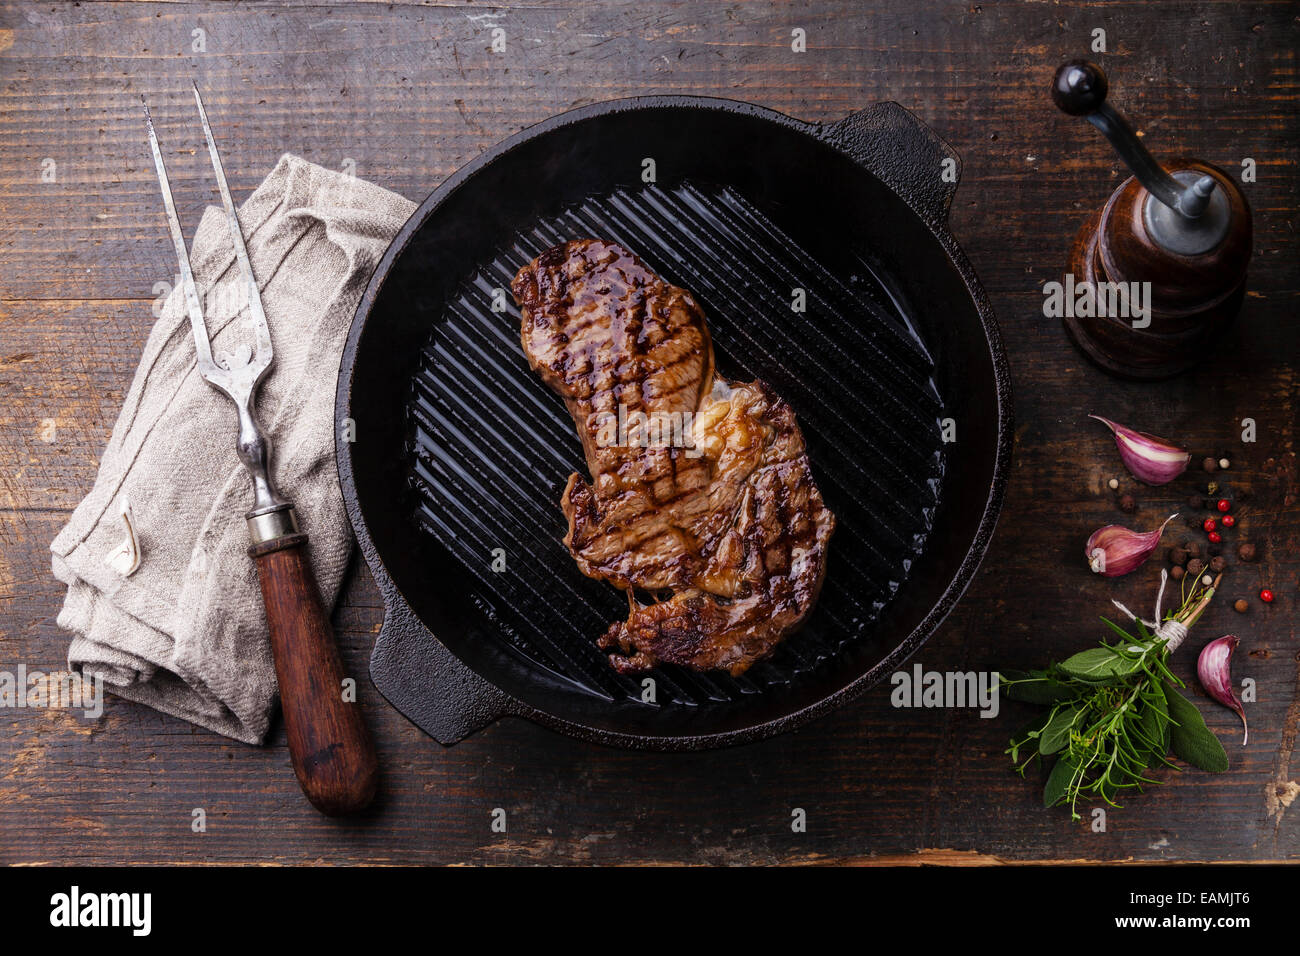 Grilled Ribeye steak entrecote on grill pan on wooden background Stock Photo